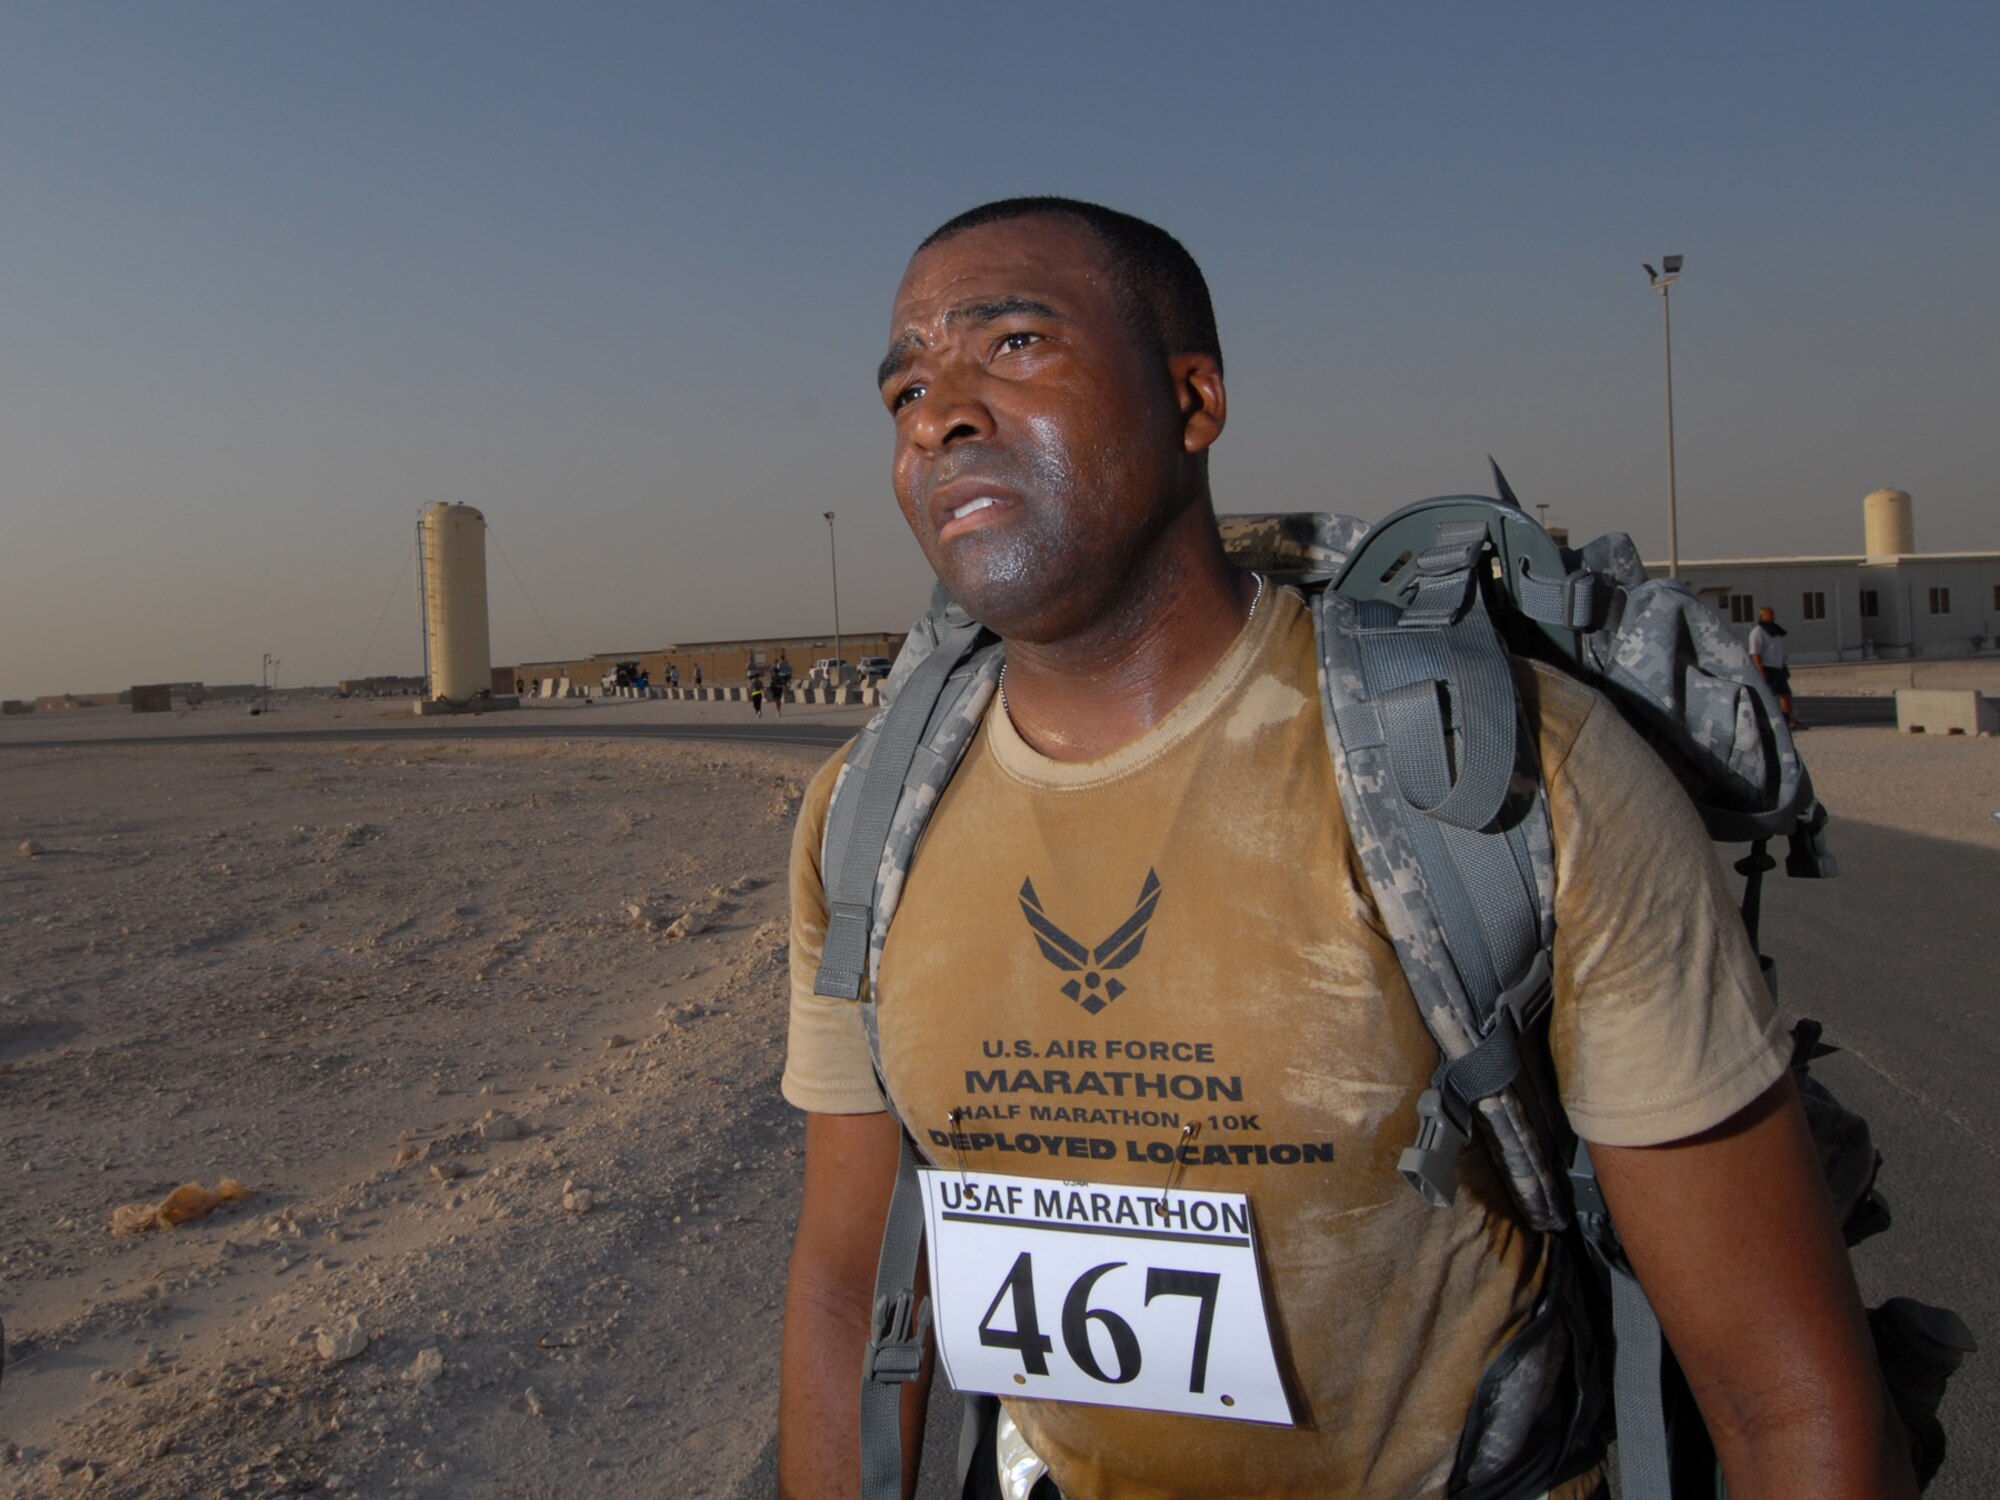 SOUTHWEST ASIA -- Army Sgt. 1st Class Ronsoni Long of Charlie Battery, 1-43 Air Defense Artillery Brigade, ran a 10K in combat boots and carried a 35-pound rucksack, here, Sept. 11, 2009. He finished the run with a time of 78:33. More than 350 participants gathered at Memorial Plaza to take part in either a half-marathon or 10K run held in conjunction with the Air Force Marathon at Wright-Patterson Air Force Base, Ohio, Sept. 18, 2009. (U.S. Air Force Photo/Tech Sgt. Jason W. Edwards)